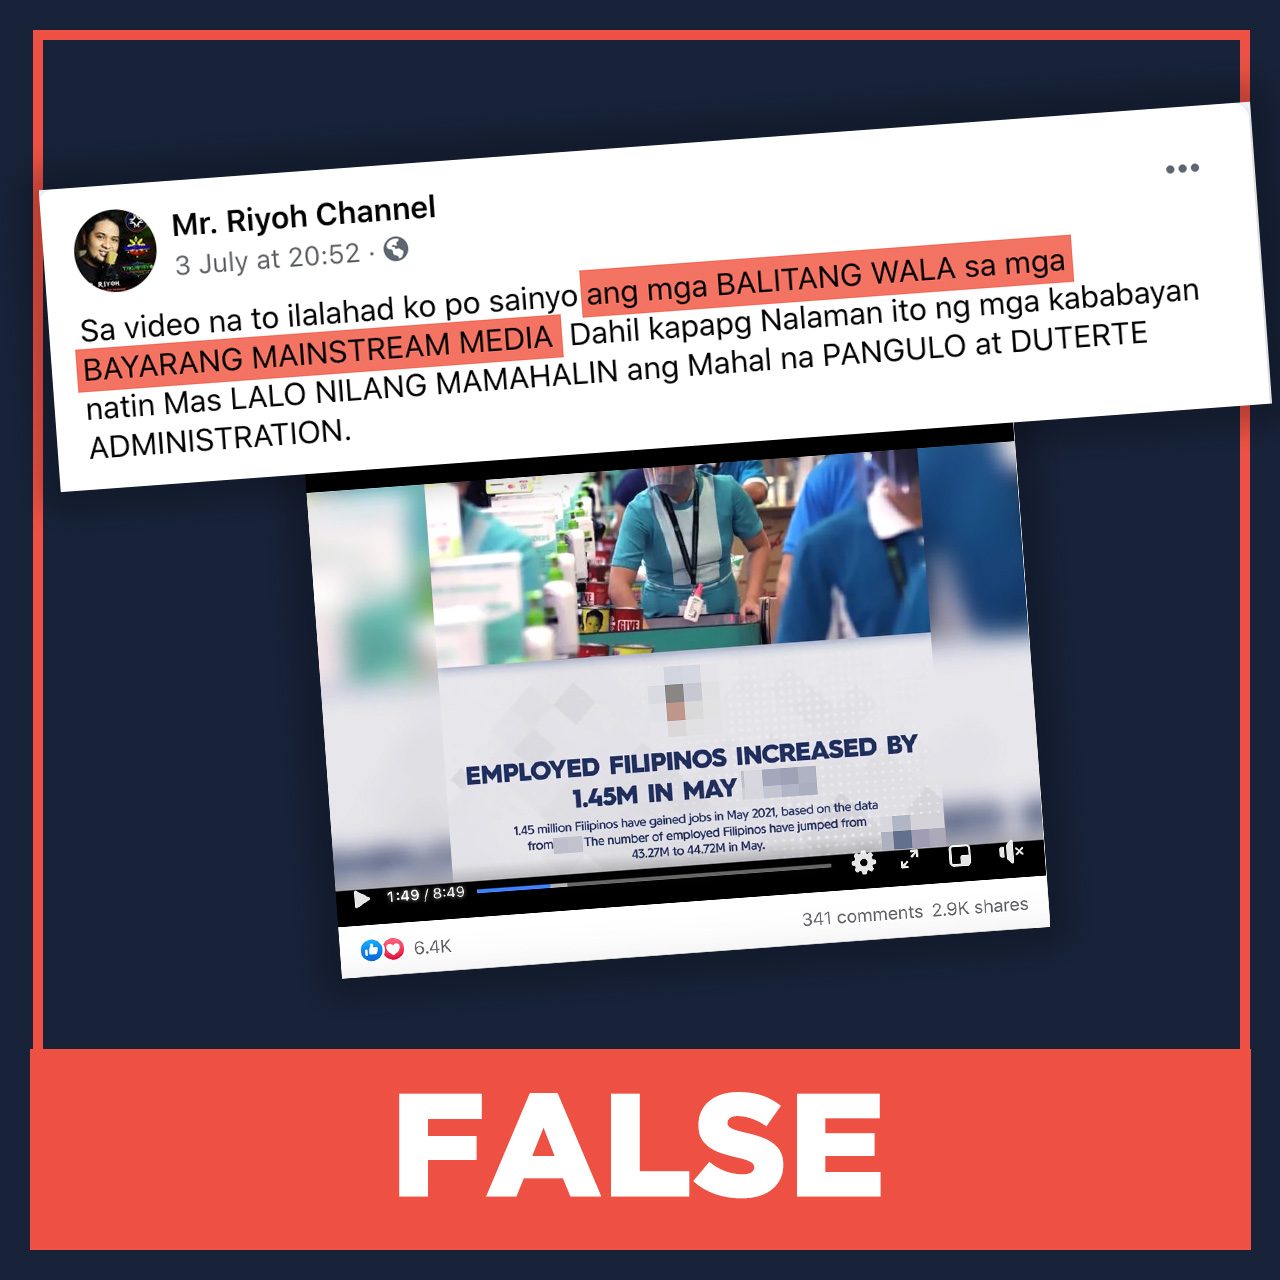 FALSE: Media did not report on increase of employed Filipinos in May 2021